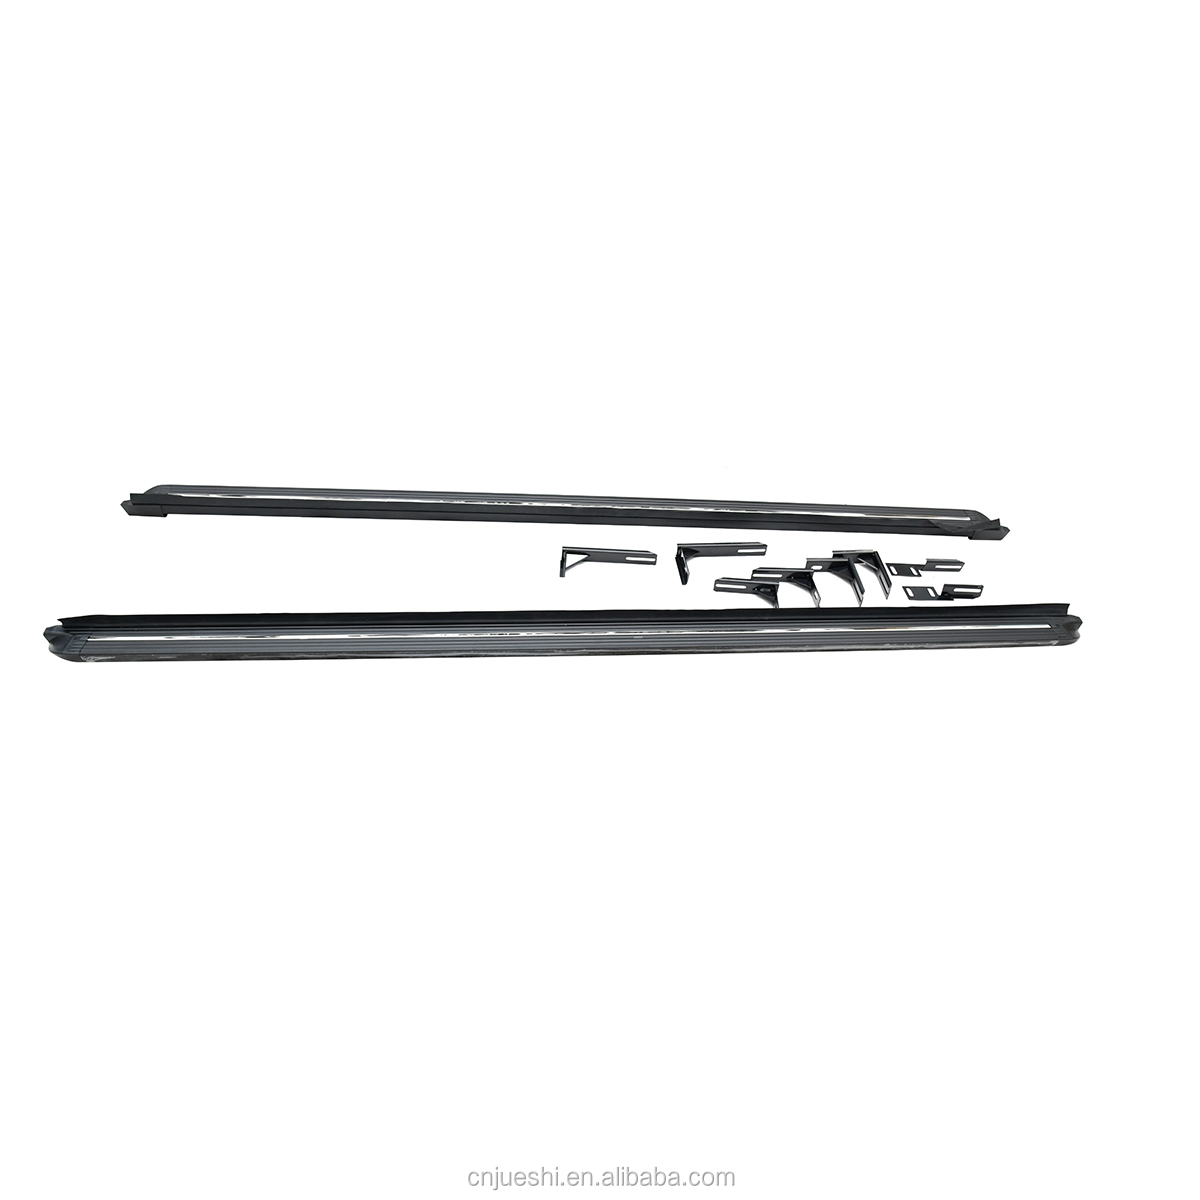 Original Type Running Board for Mercedes Benz VITO W639 Series Featured Image